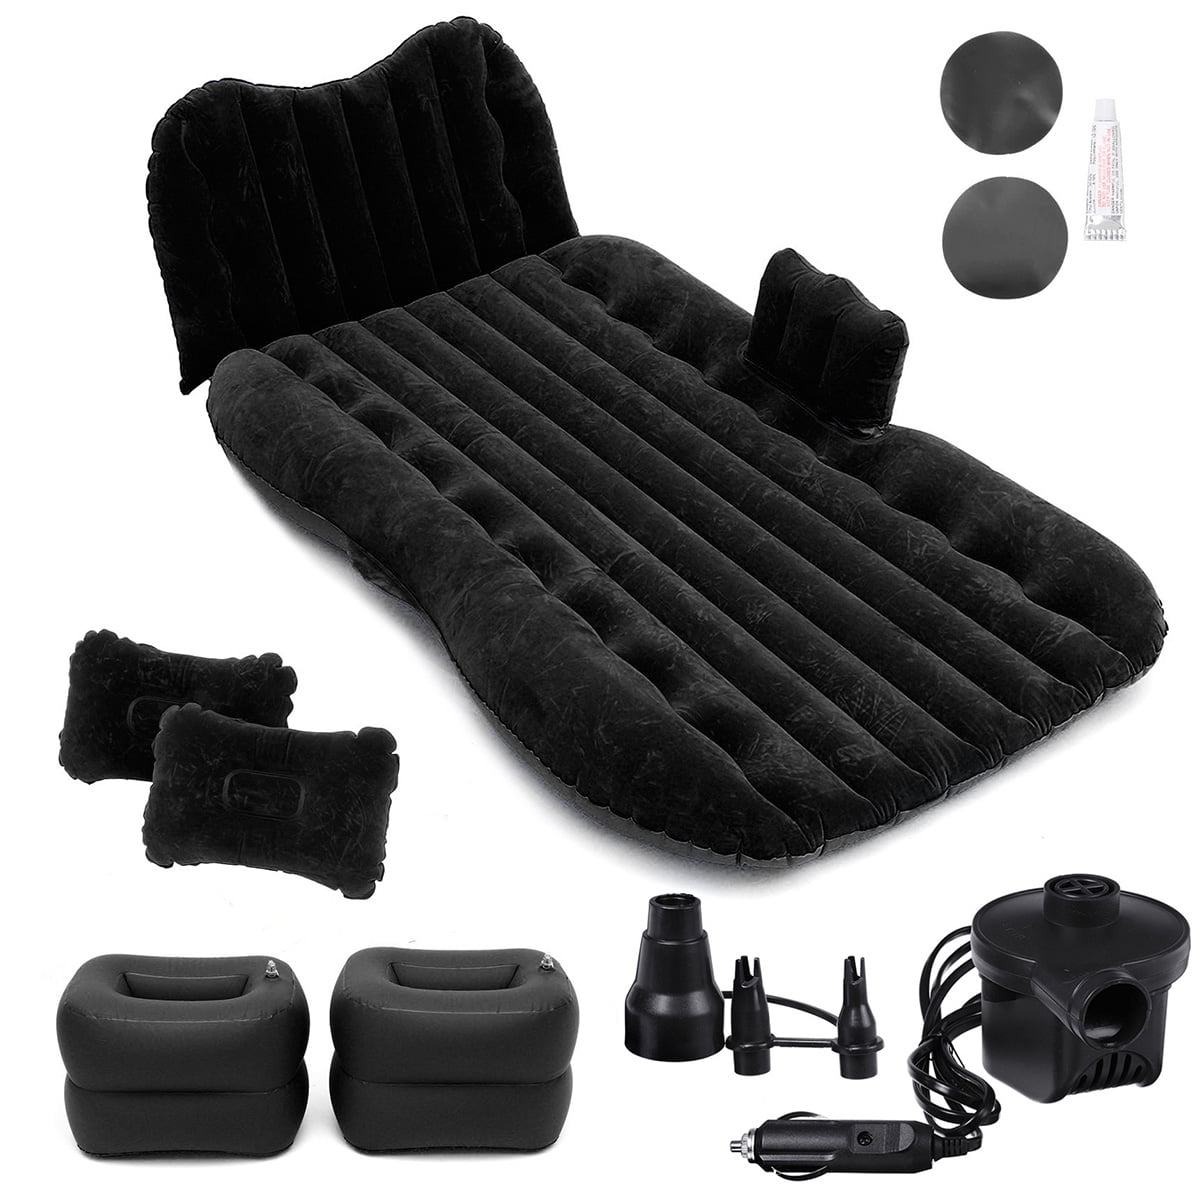 Details about   Car Air Bed Sleep Travel Inflatable Mattress Seat Cushion Backrest Mat Camping 